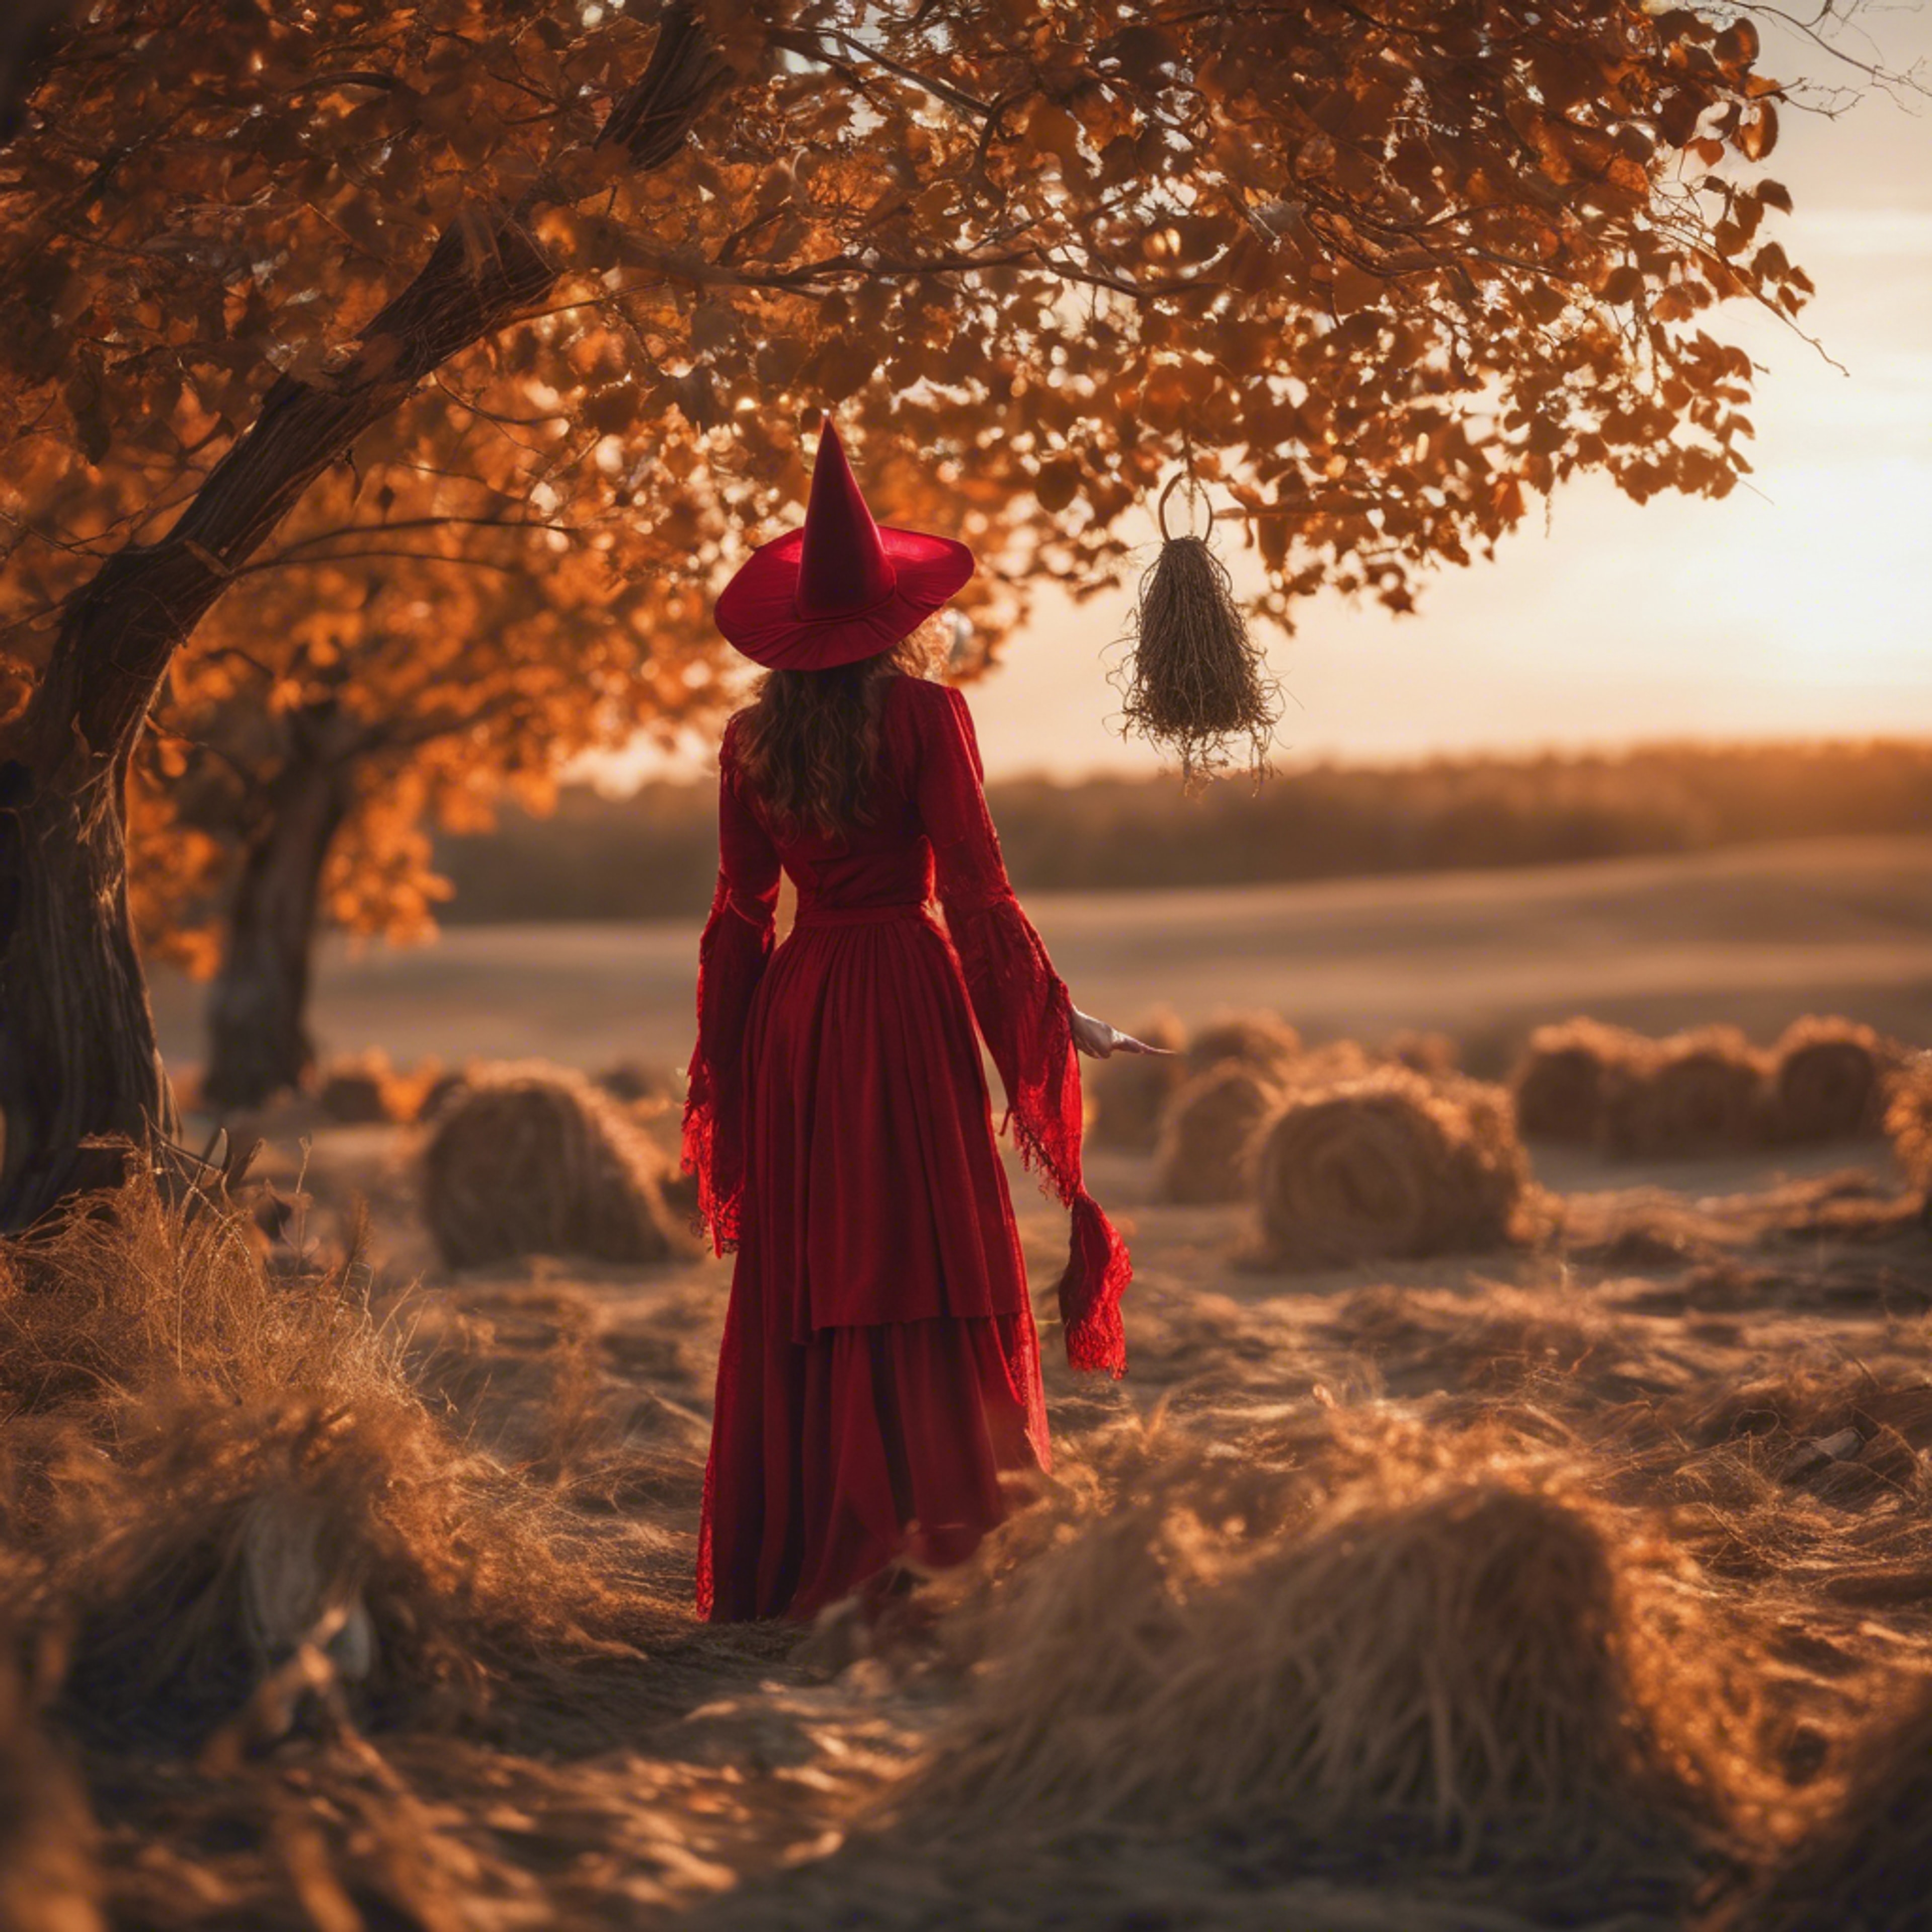 A lone witch in red garb practicing her Gothic rituals by the golden light of a harvest moon.壁紙[9a5f1b3ad6ac4ad6bd52]